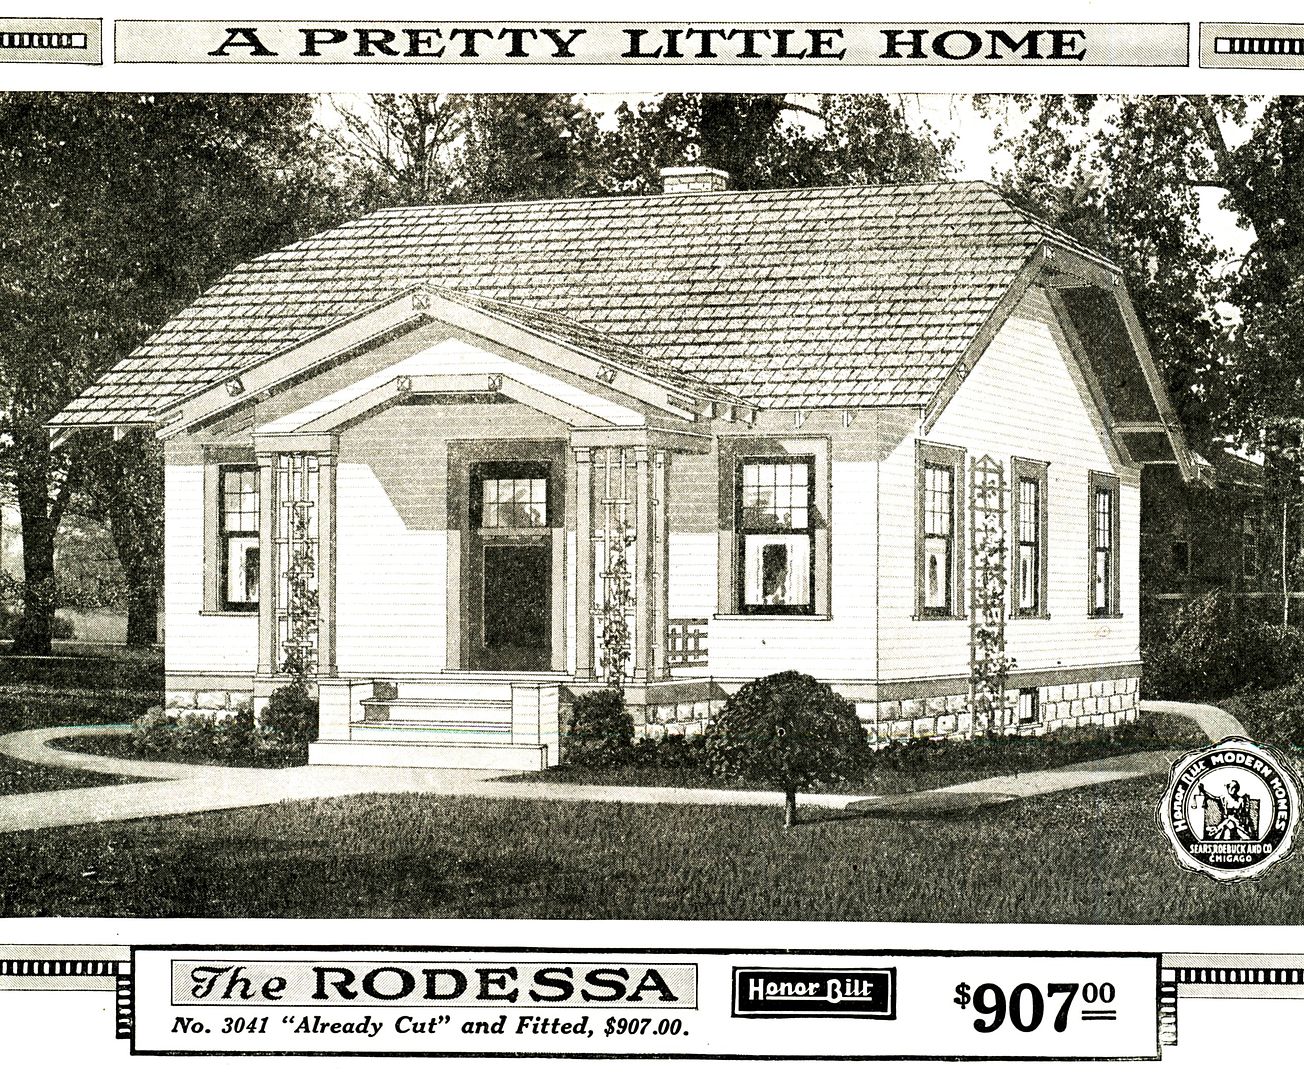 The Rodessa, as seen in the 1919 catalog. 